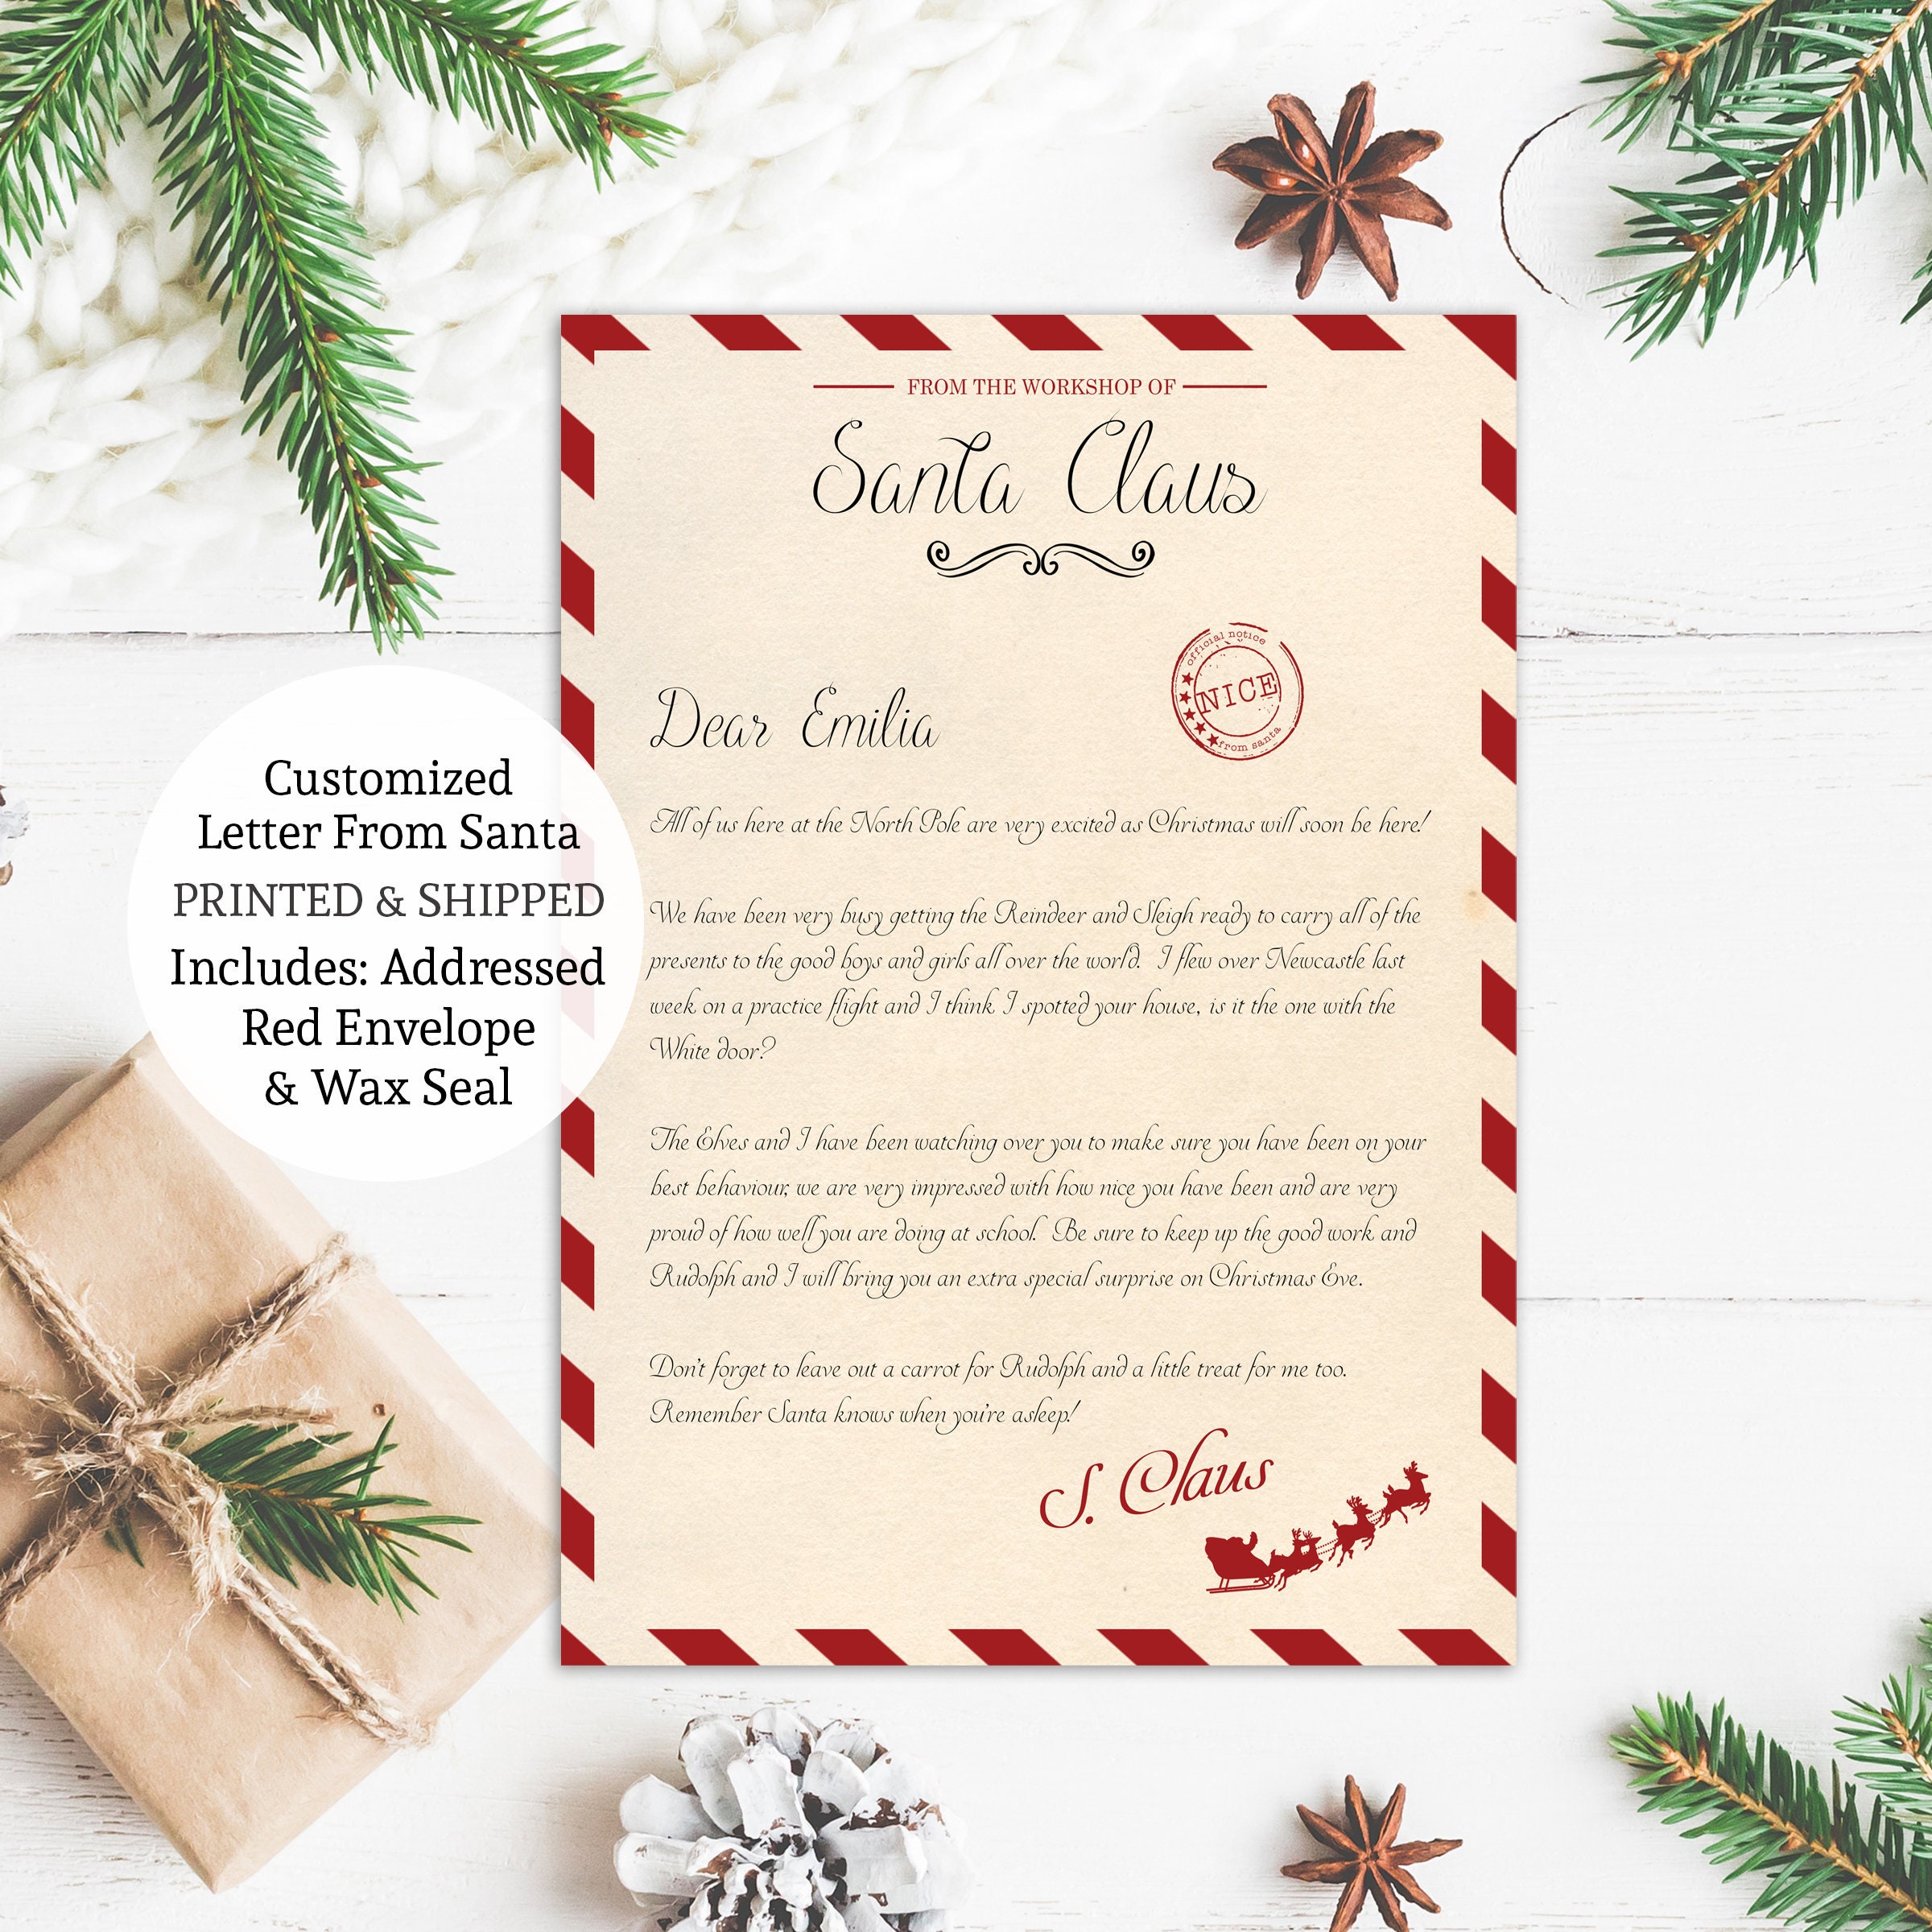 PERSONALISED A4 LETTER FROM SANTA SENT WITH NORTH POLE ENVELOPE UNIQUE GIFT 